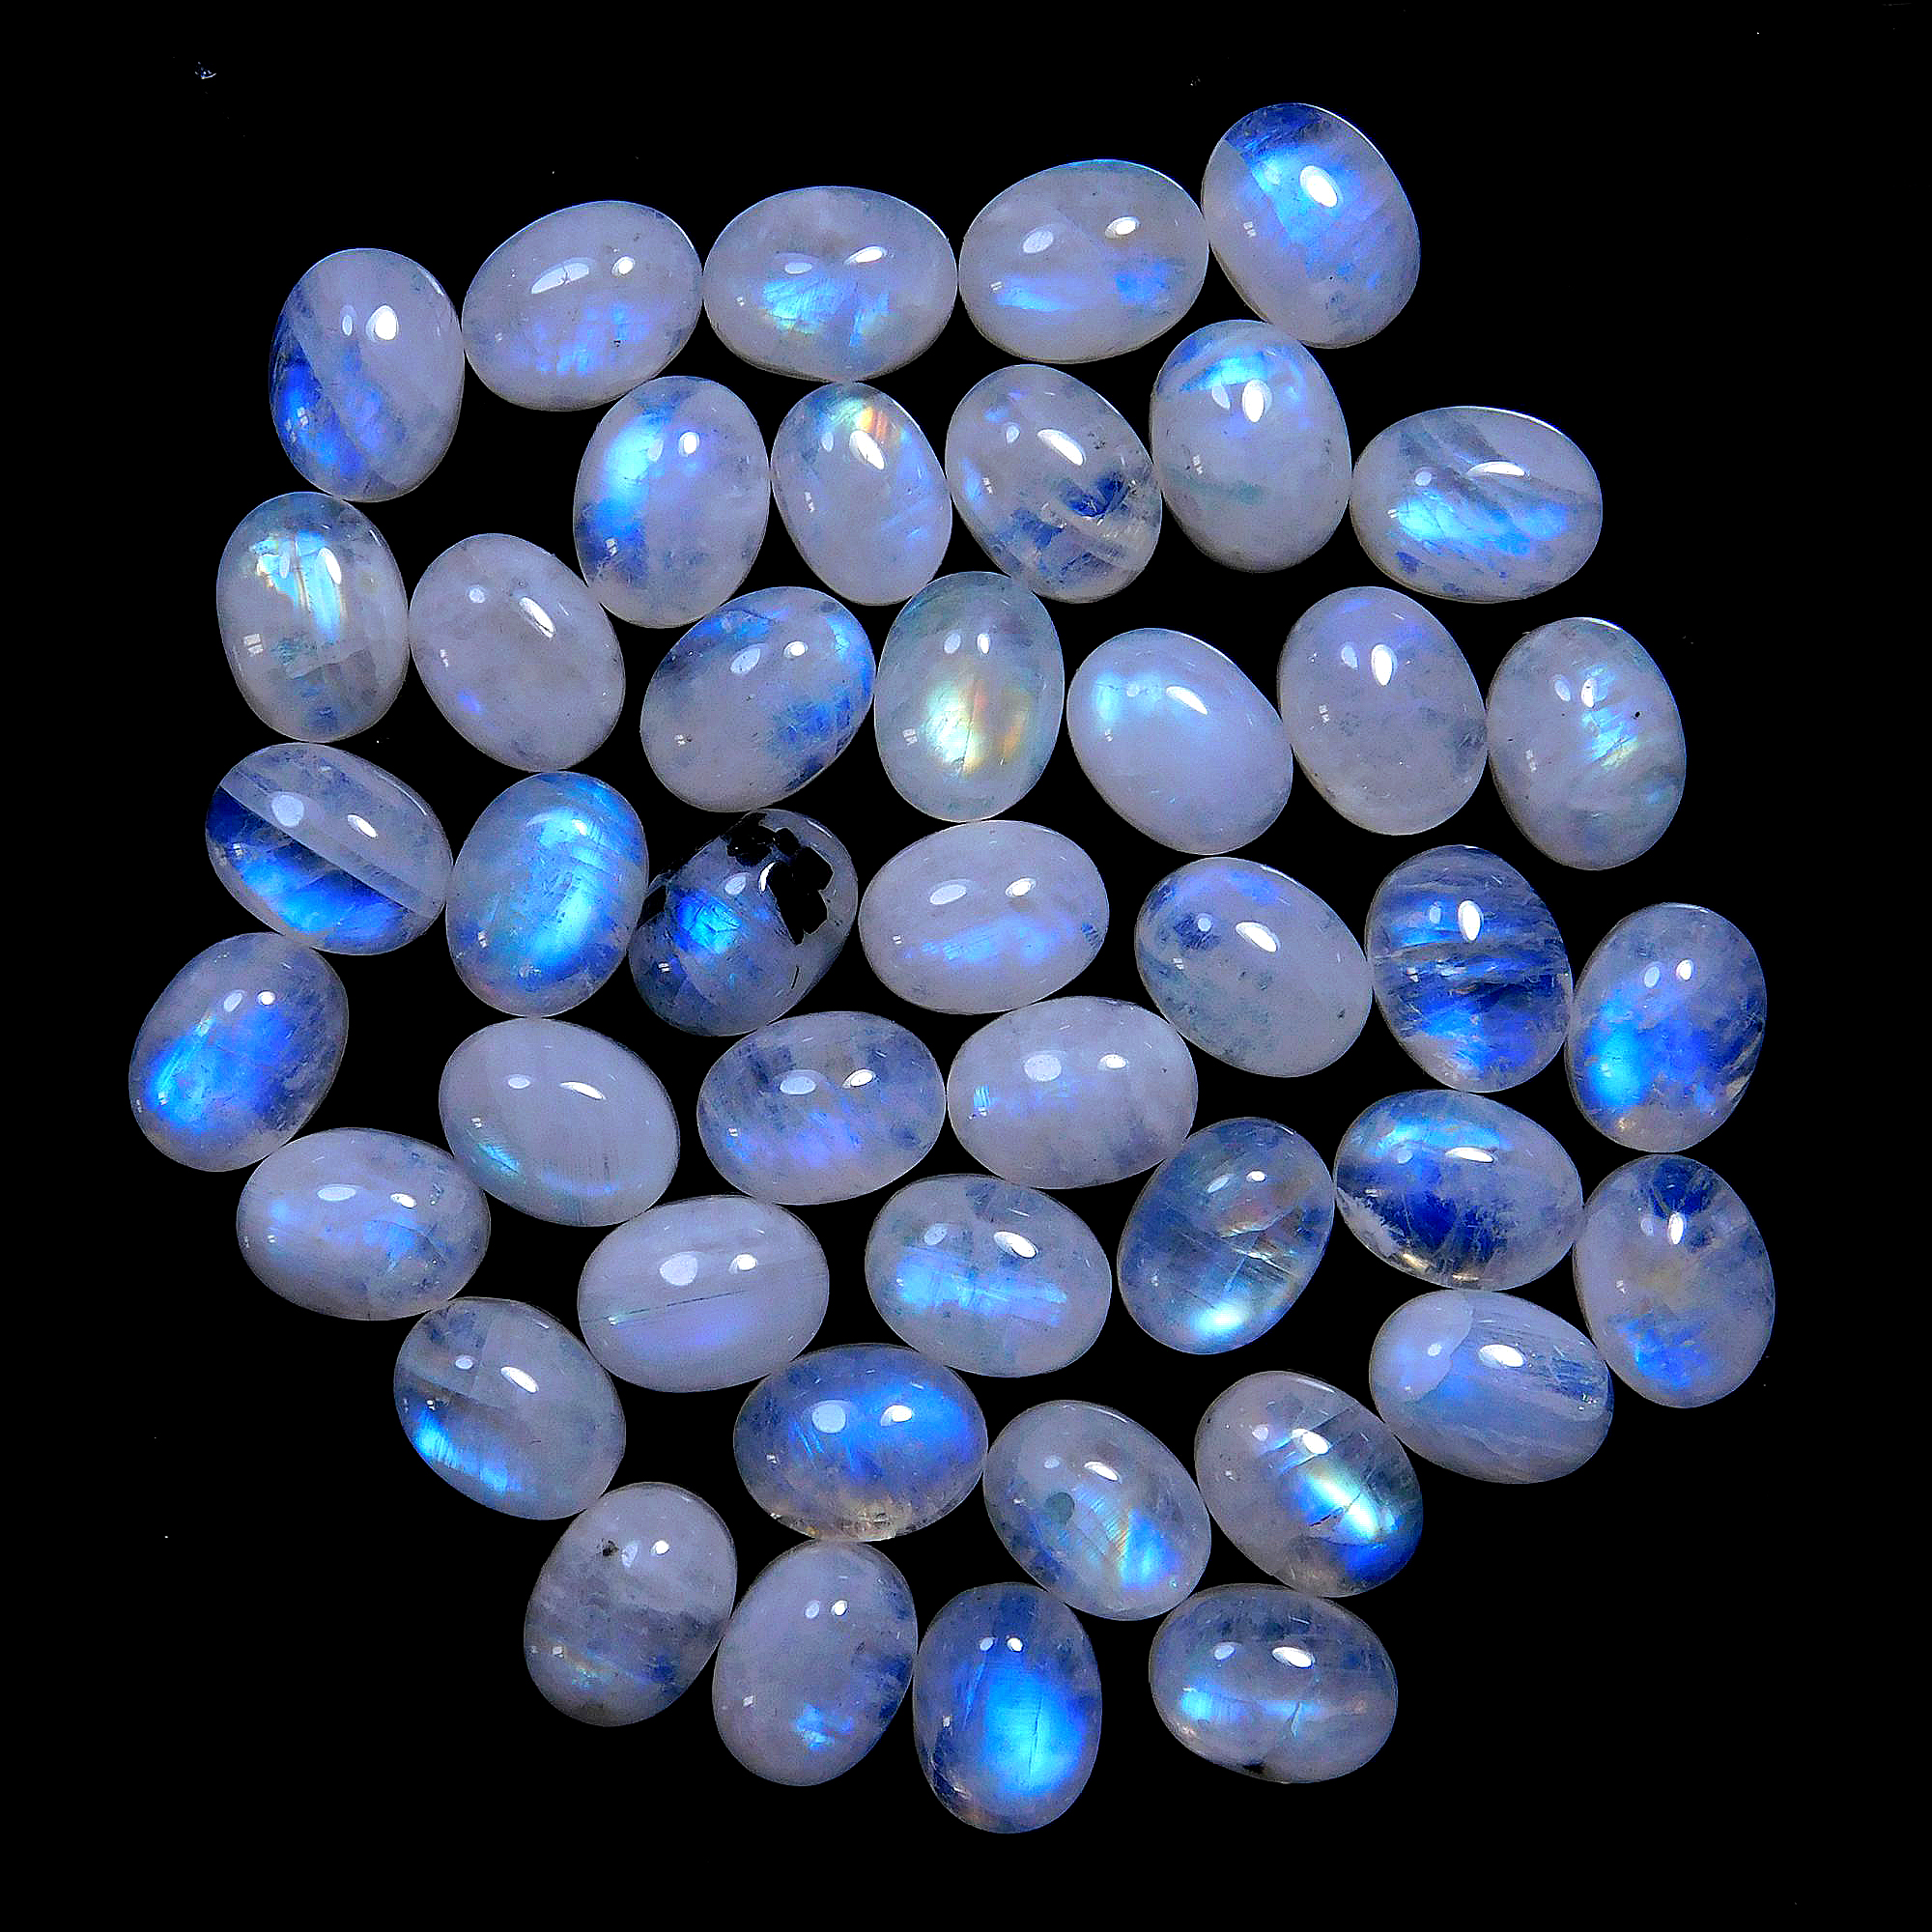 43 Pcs.99 Cts. Natural Rainbow Moonstone calibrated Oval Cabochon Loose Gemstone Wholesale Lot Size 9x7mm